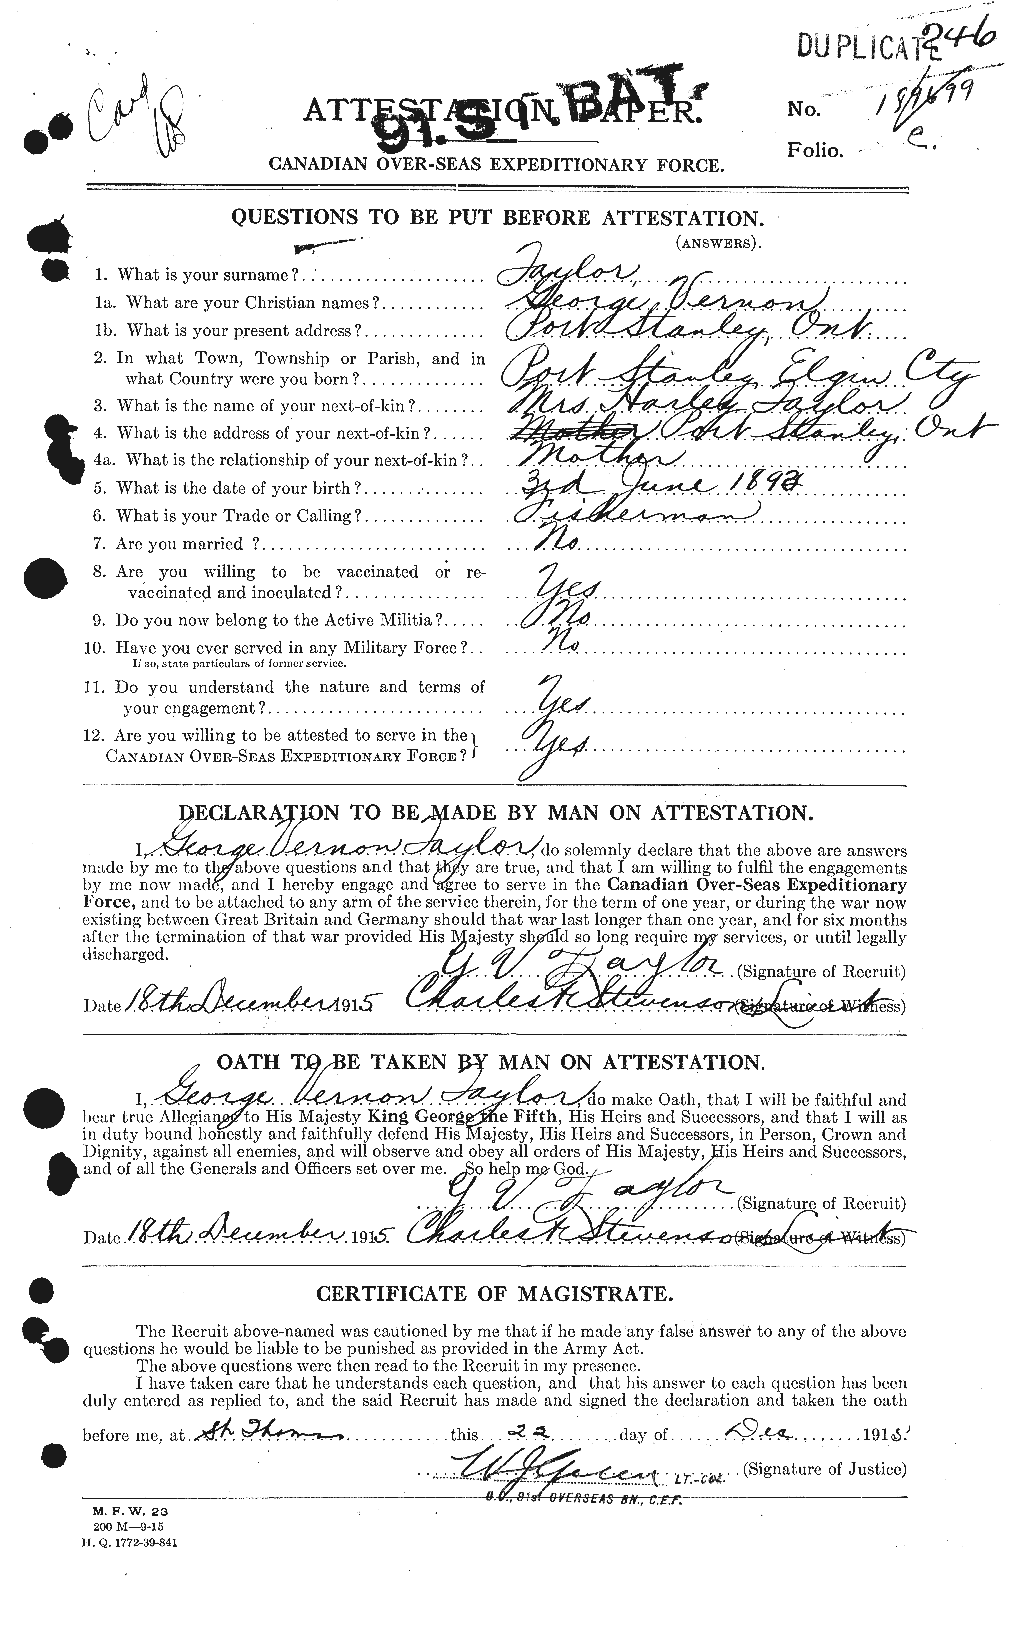 Personnel Records of the First World War - CEF 626358a